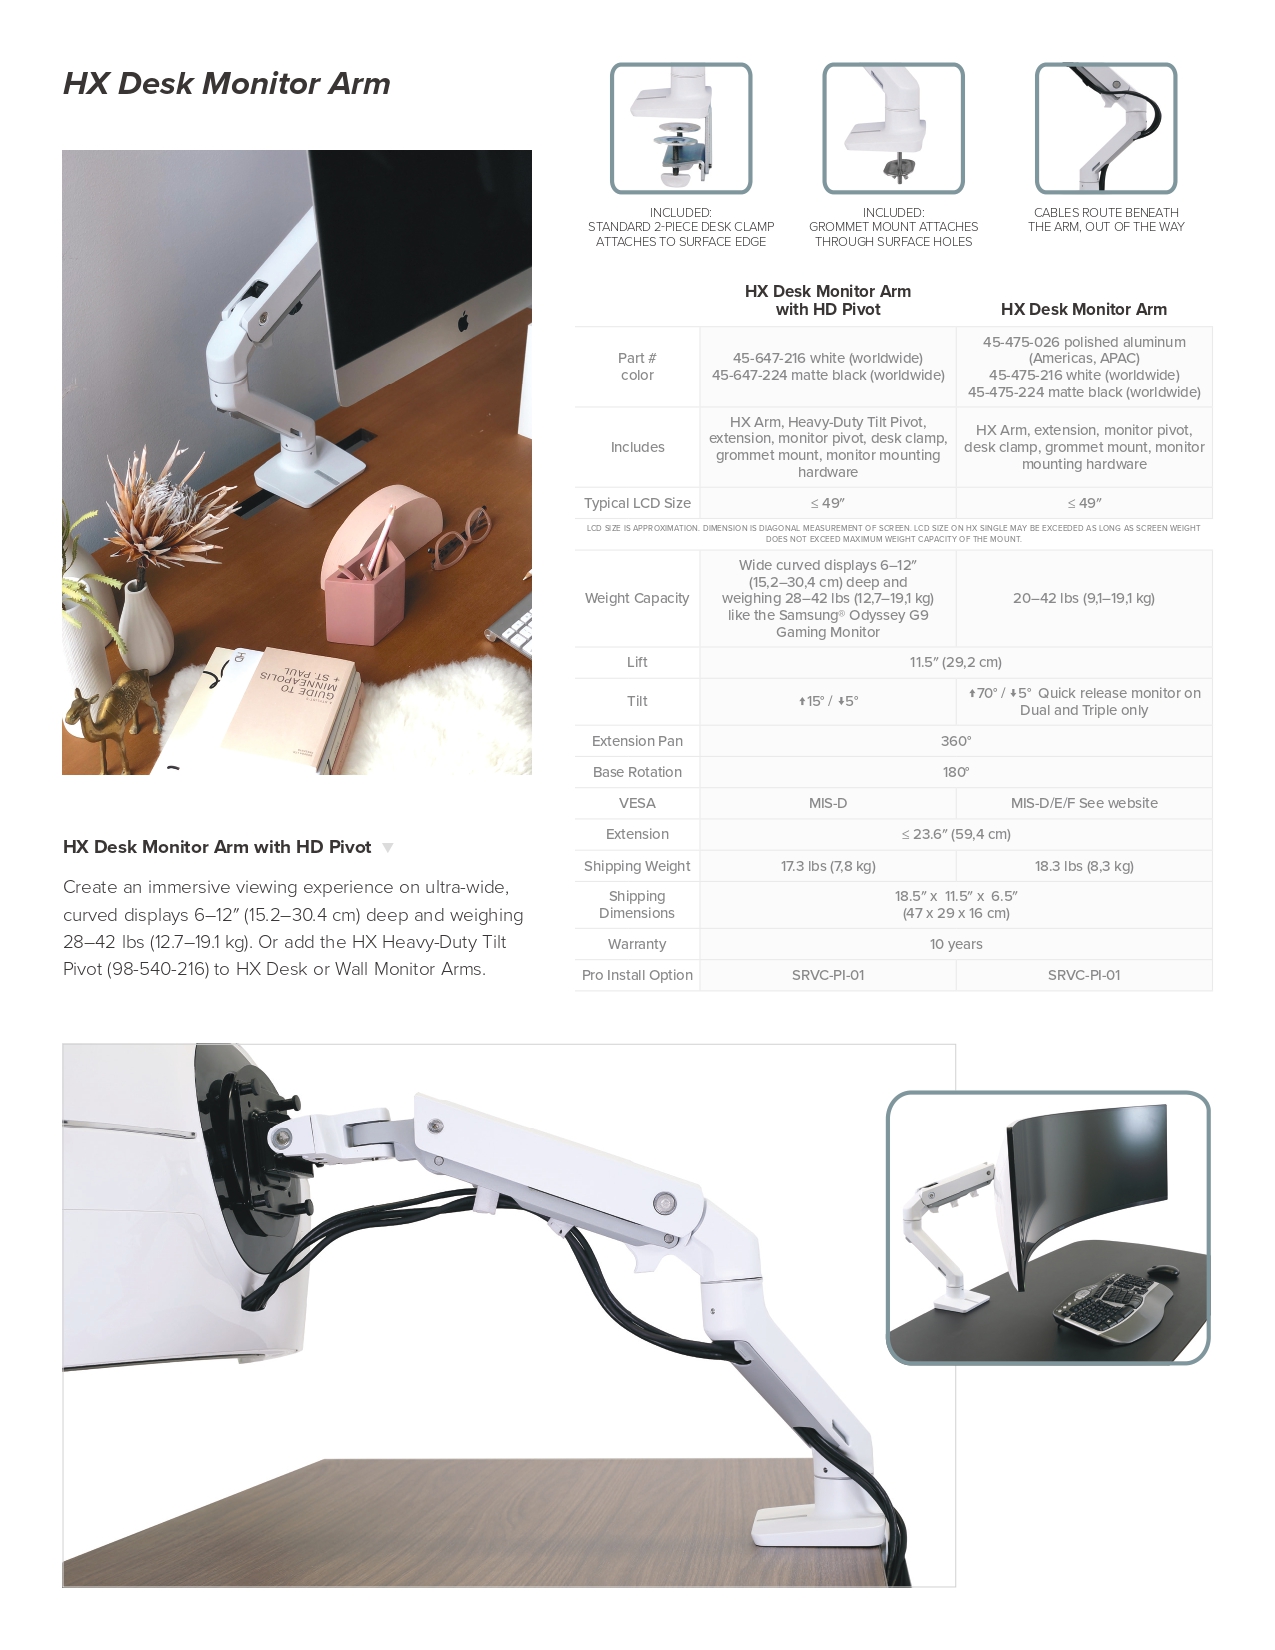 A large marketing image providing additional information about the product Ergotron HX Desk Dual Monitor Arm - Matte Black - Additional alt info not provided